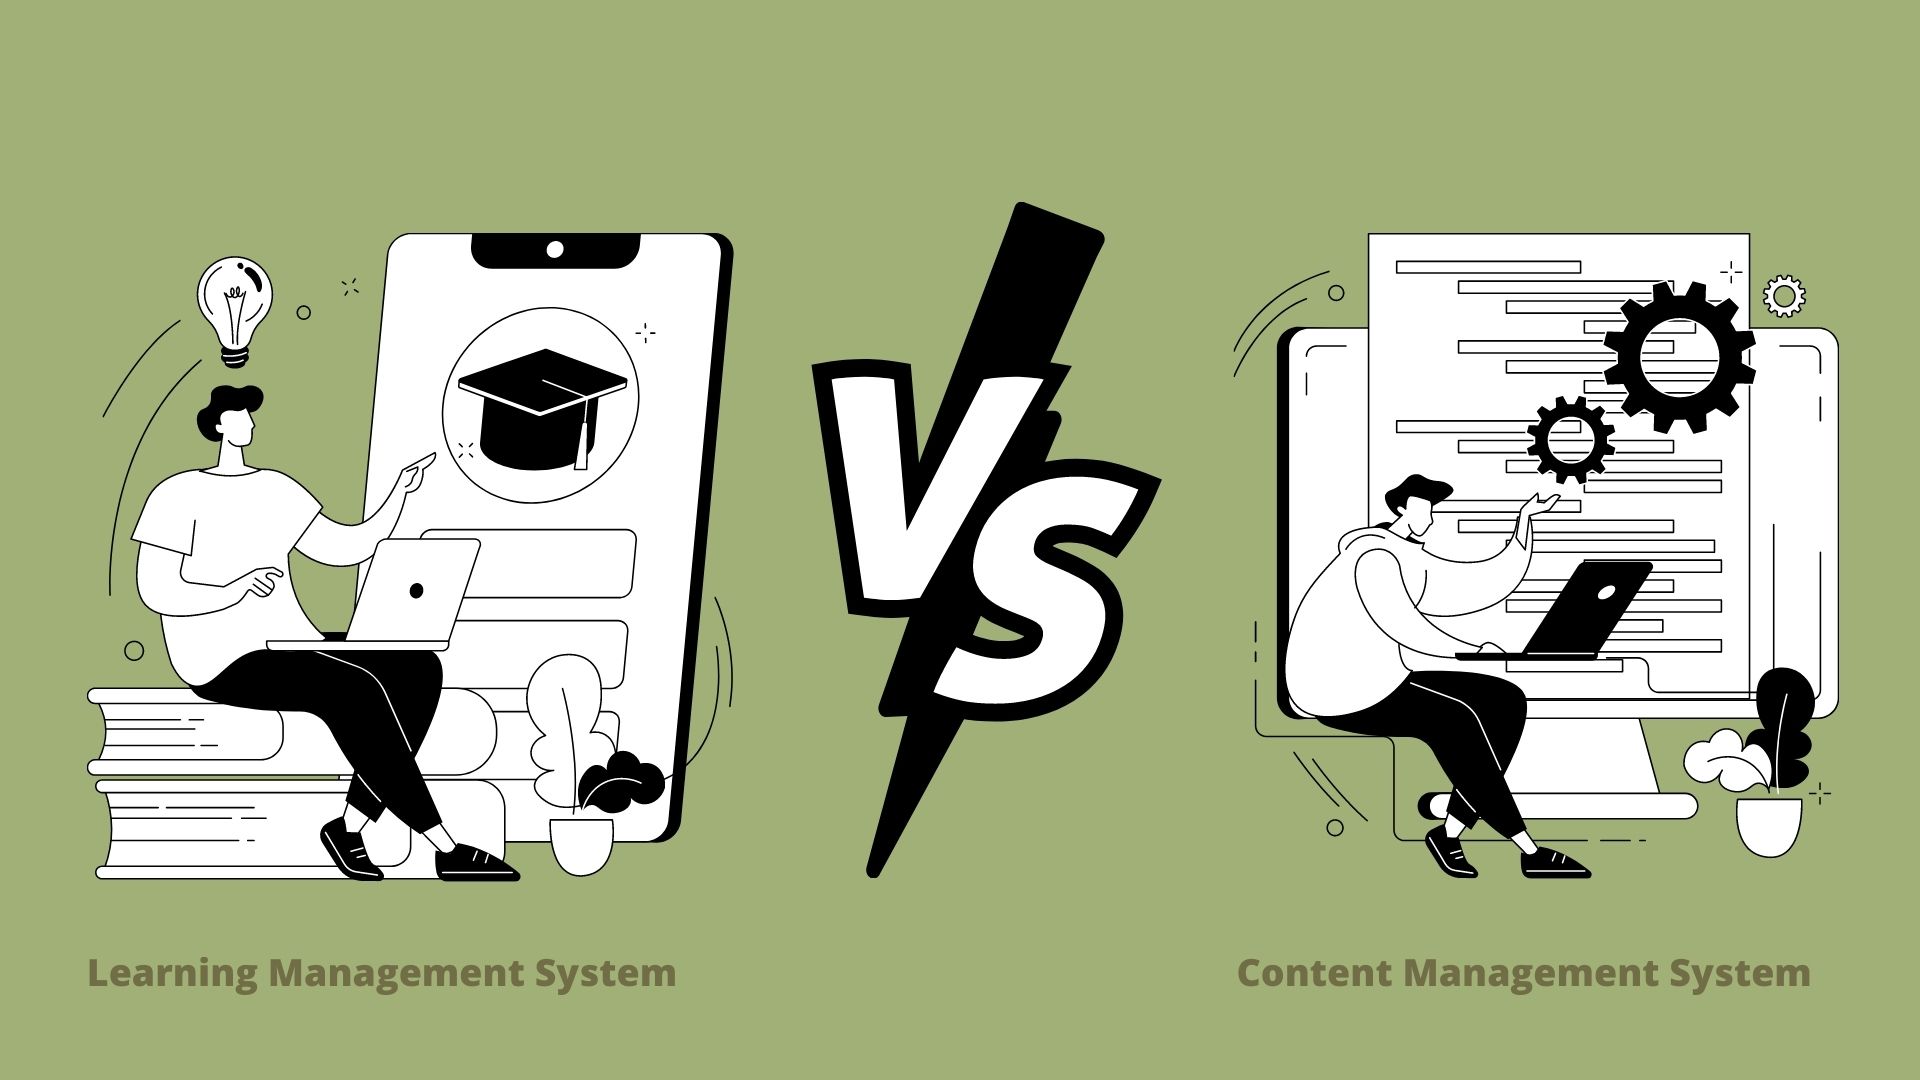 LMS vs CMS – A Comparison Between Learning Management System and Content Management System